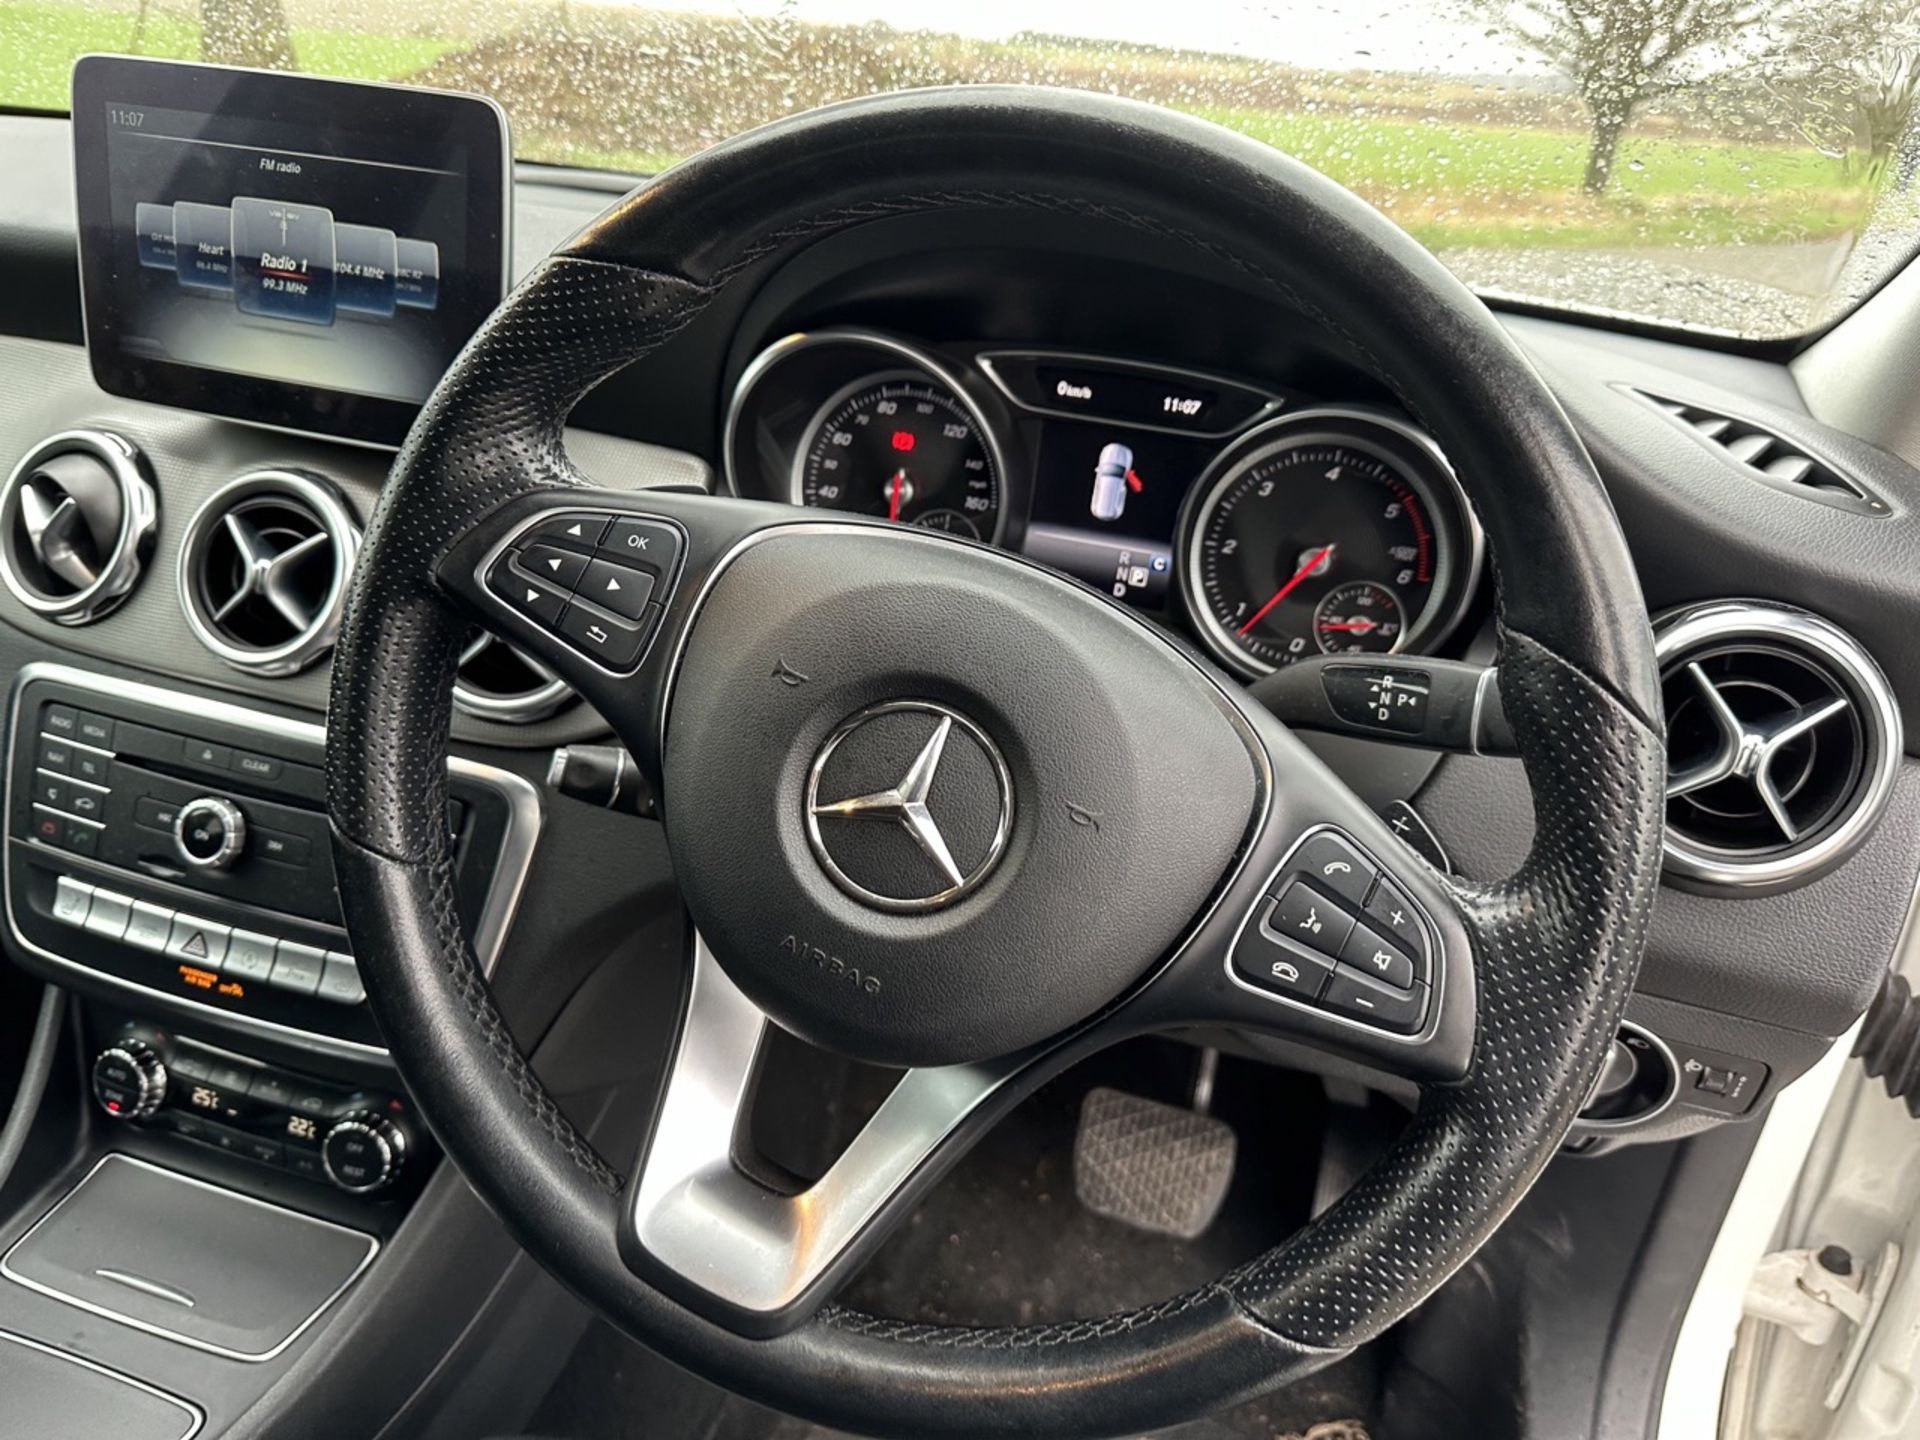 MERCEDES GLA 200d AUTO "SPORT EXECUTIVE" 2019 MODEL - LEATHER - LOW MILES - AIR CON - Image 13 of 17